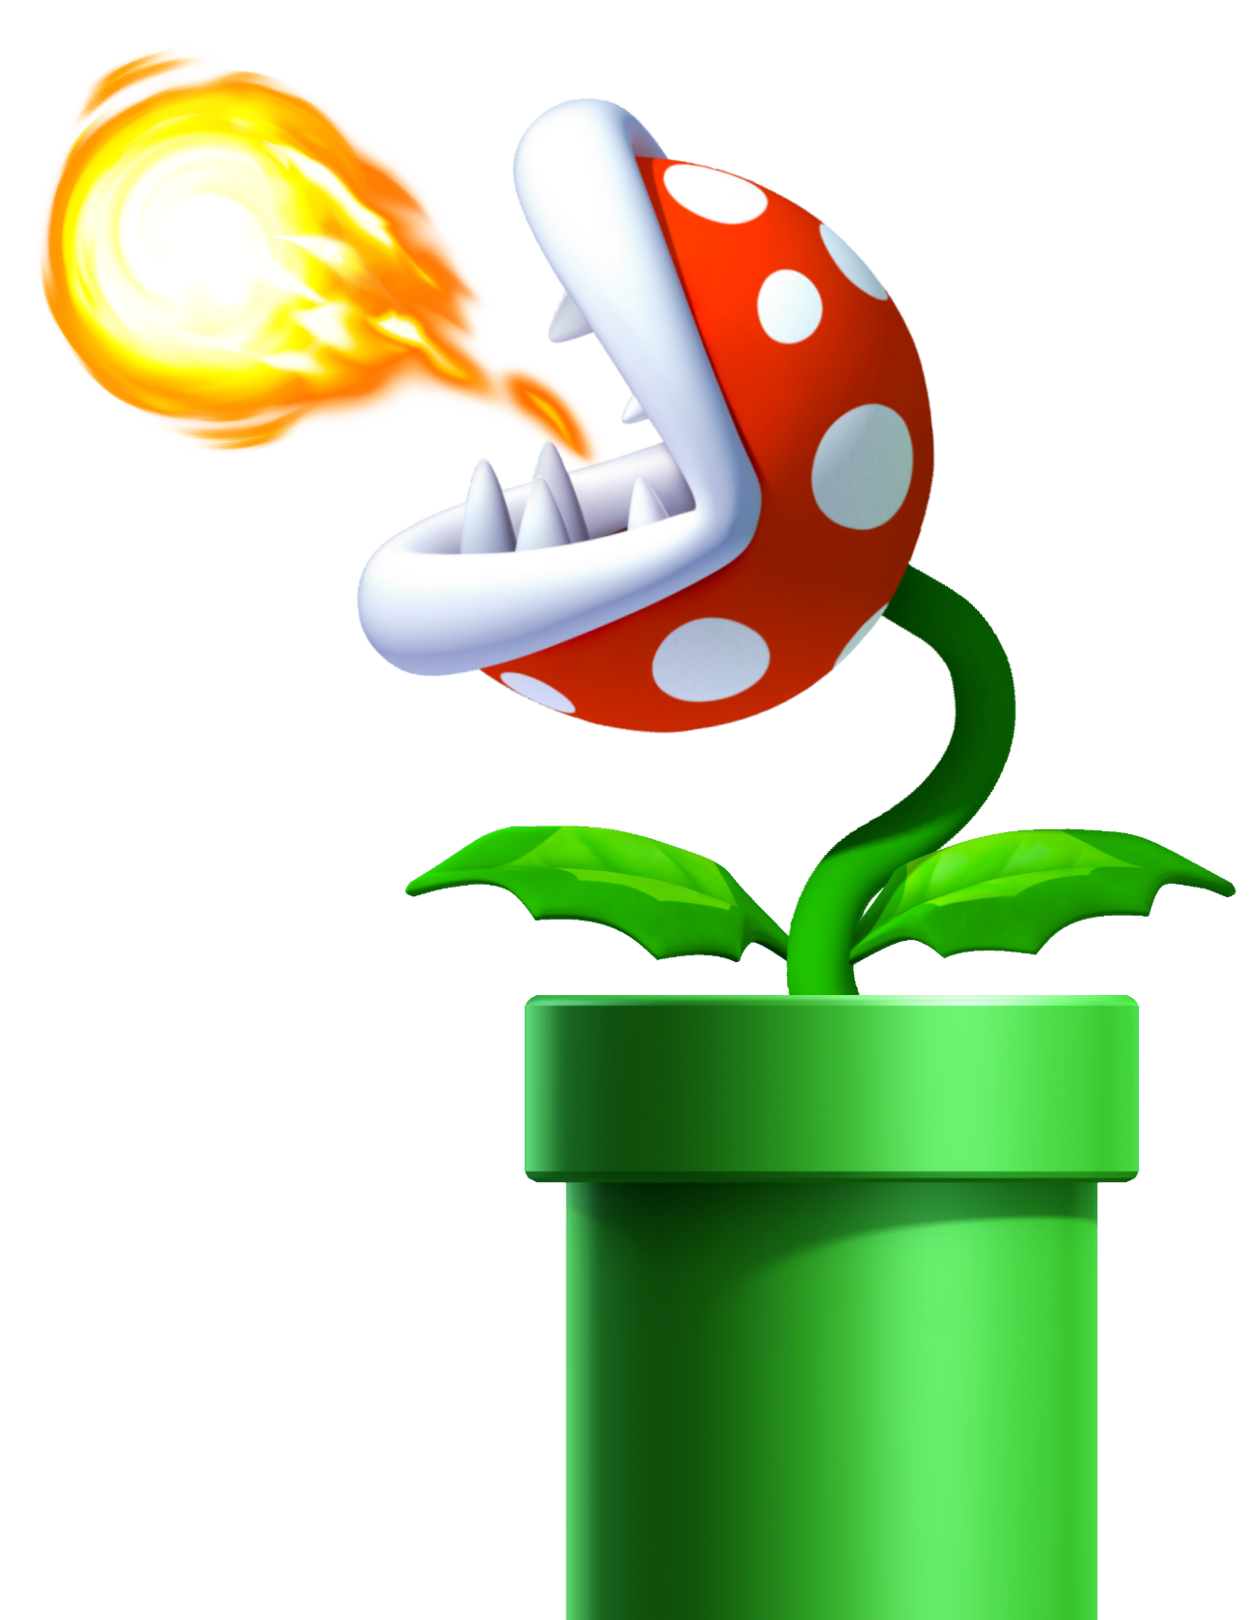 Mario Super Bros Joint Free HQ Image PNG Image